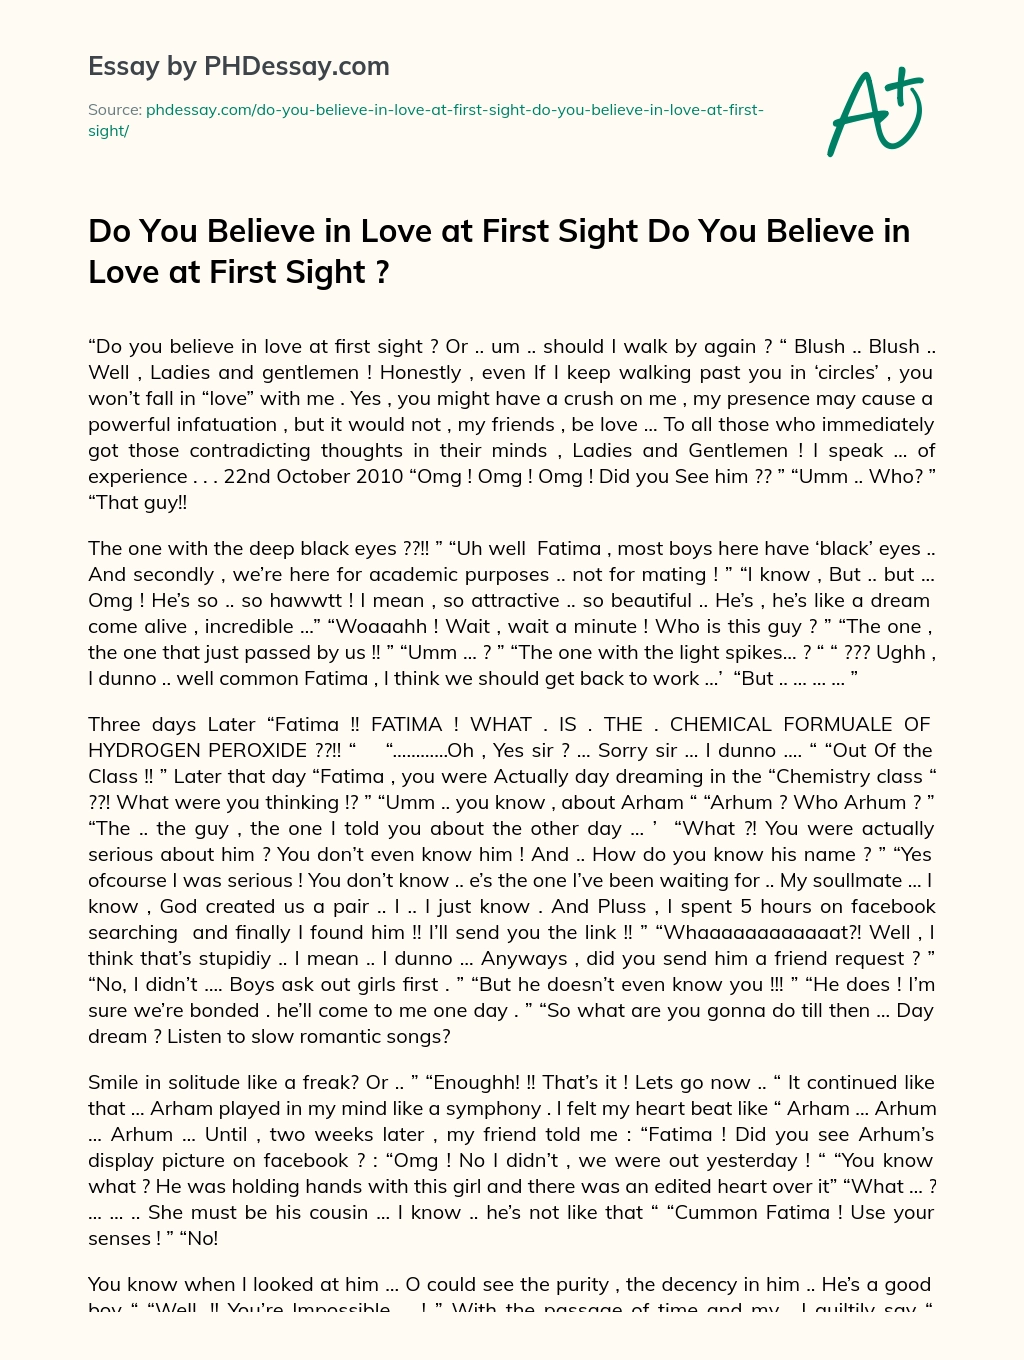 Do You Believe in Love at First Sight  Do You Believe in Love at First Sight ? essay